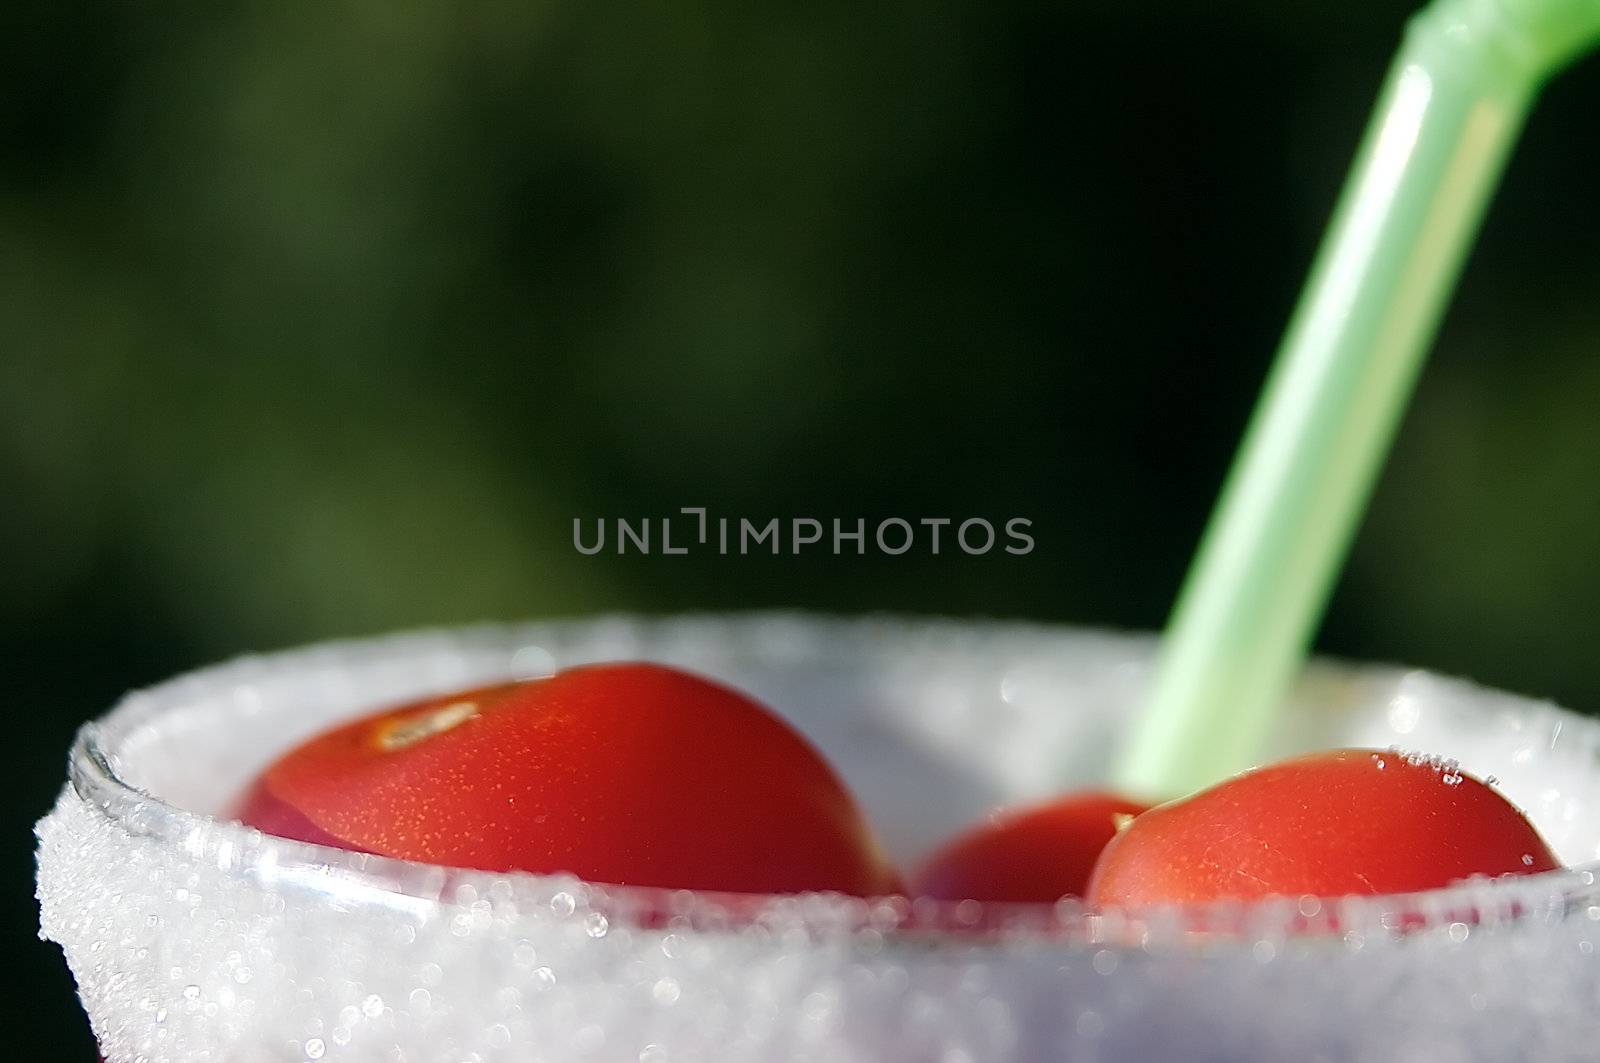 You thought you got a fresh tomato juice before? Can't beat this one. Small tomatoes in a glass filled with water and with a sugar coating with a straw.